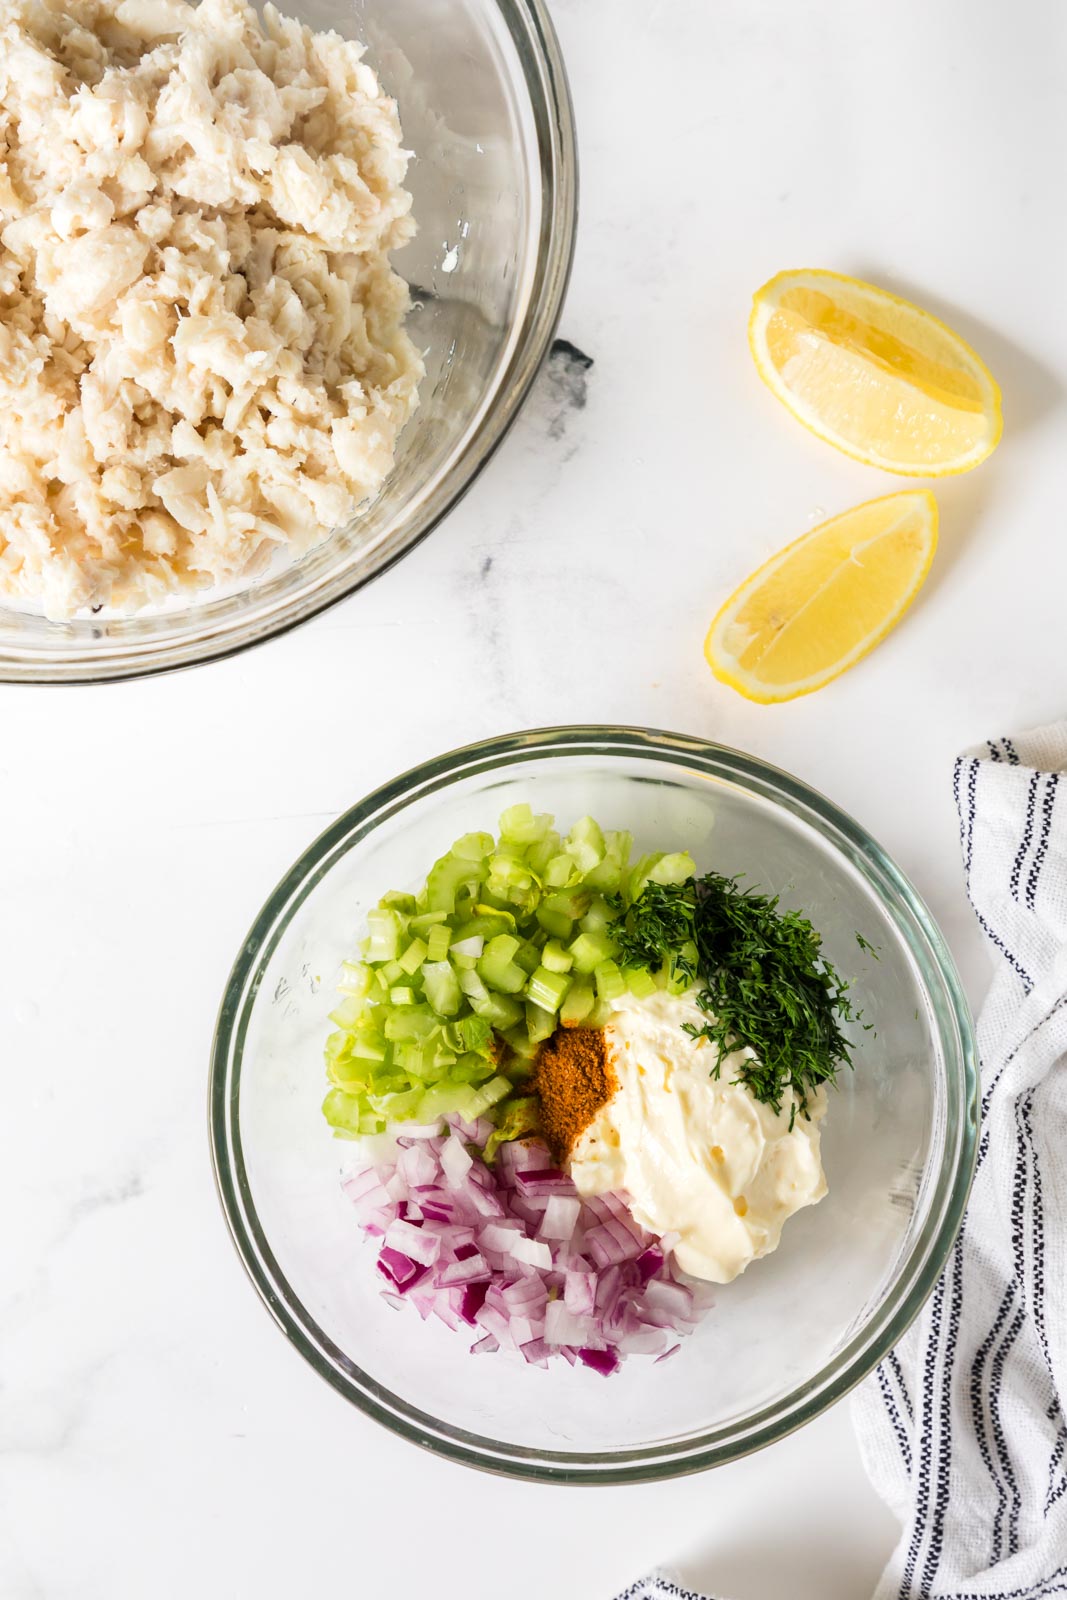 Overhead image of a bowl of lump crab meat next to a bowl full of the remaining ingredients for crab meat salad.